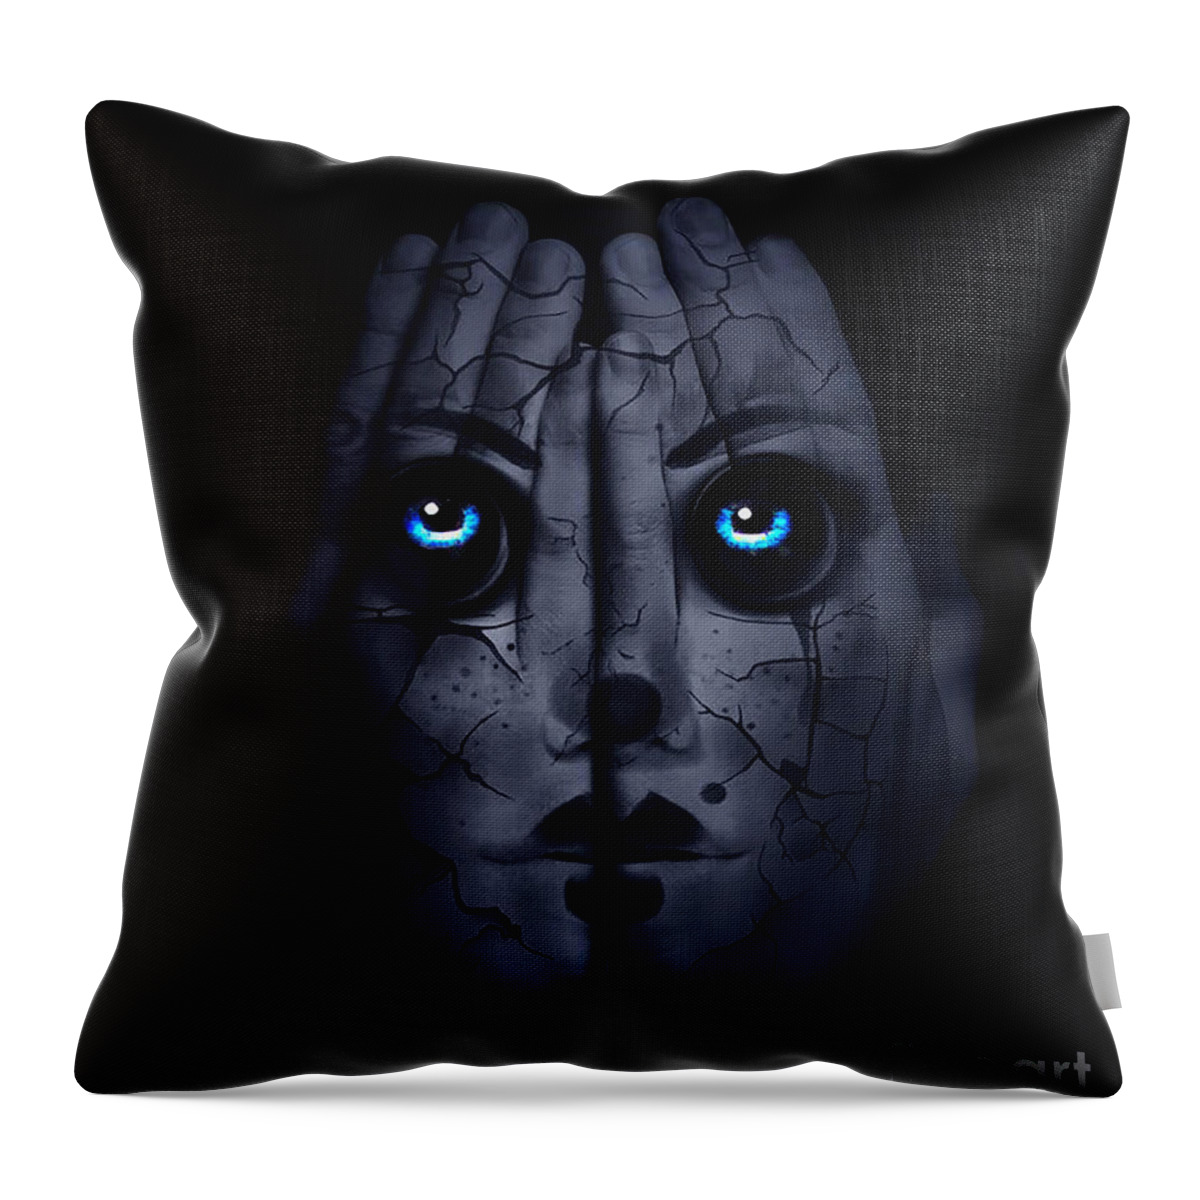 Halloween Throw Pillow featuring the digital art The Return by Kathy Kelly